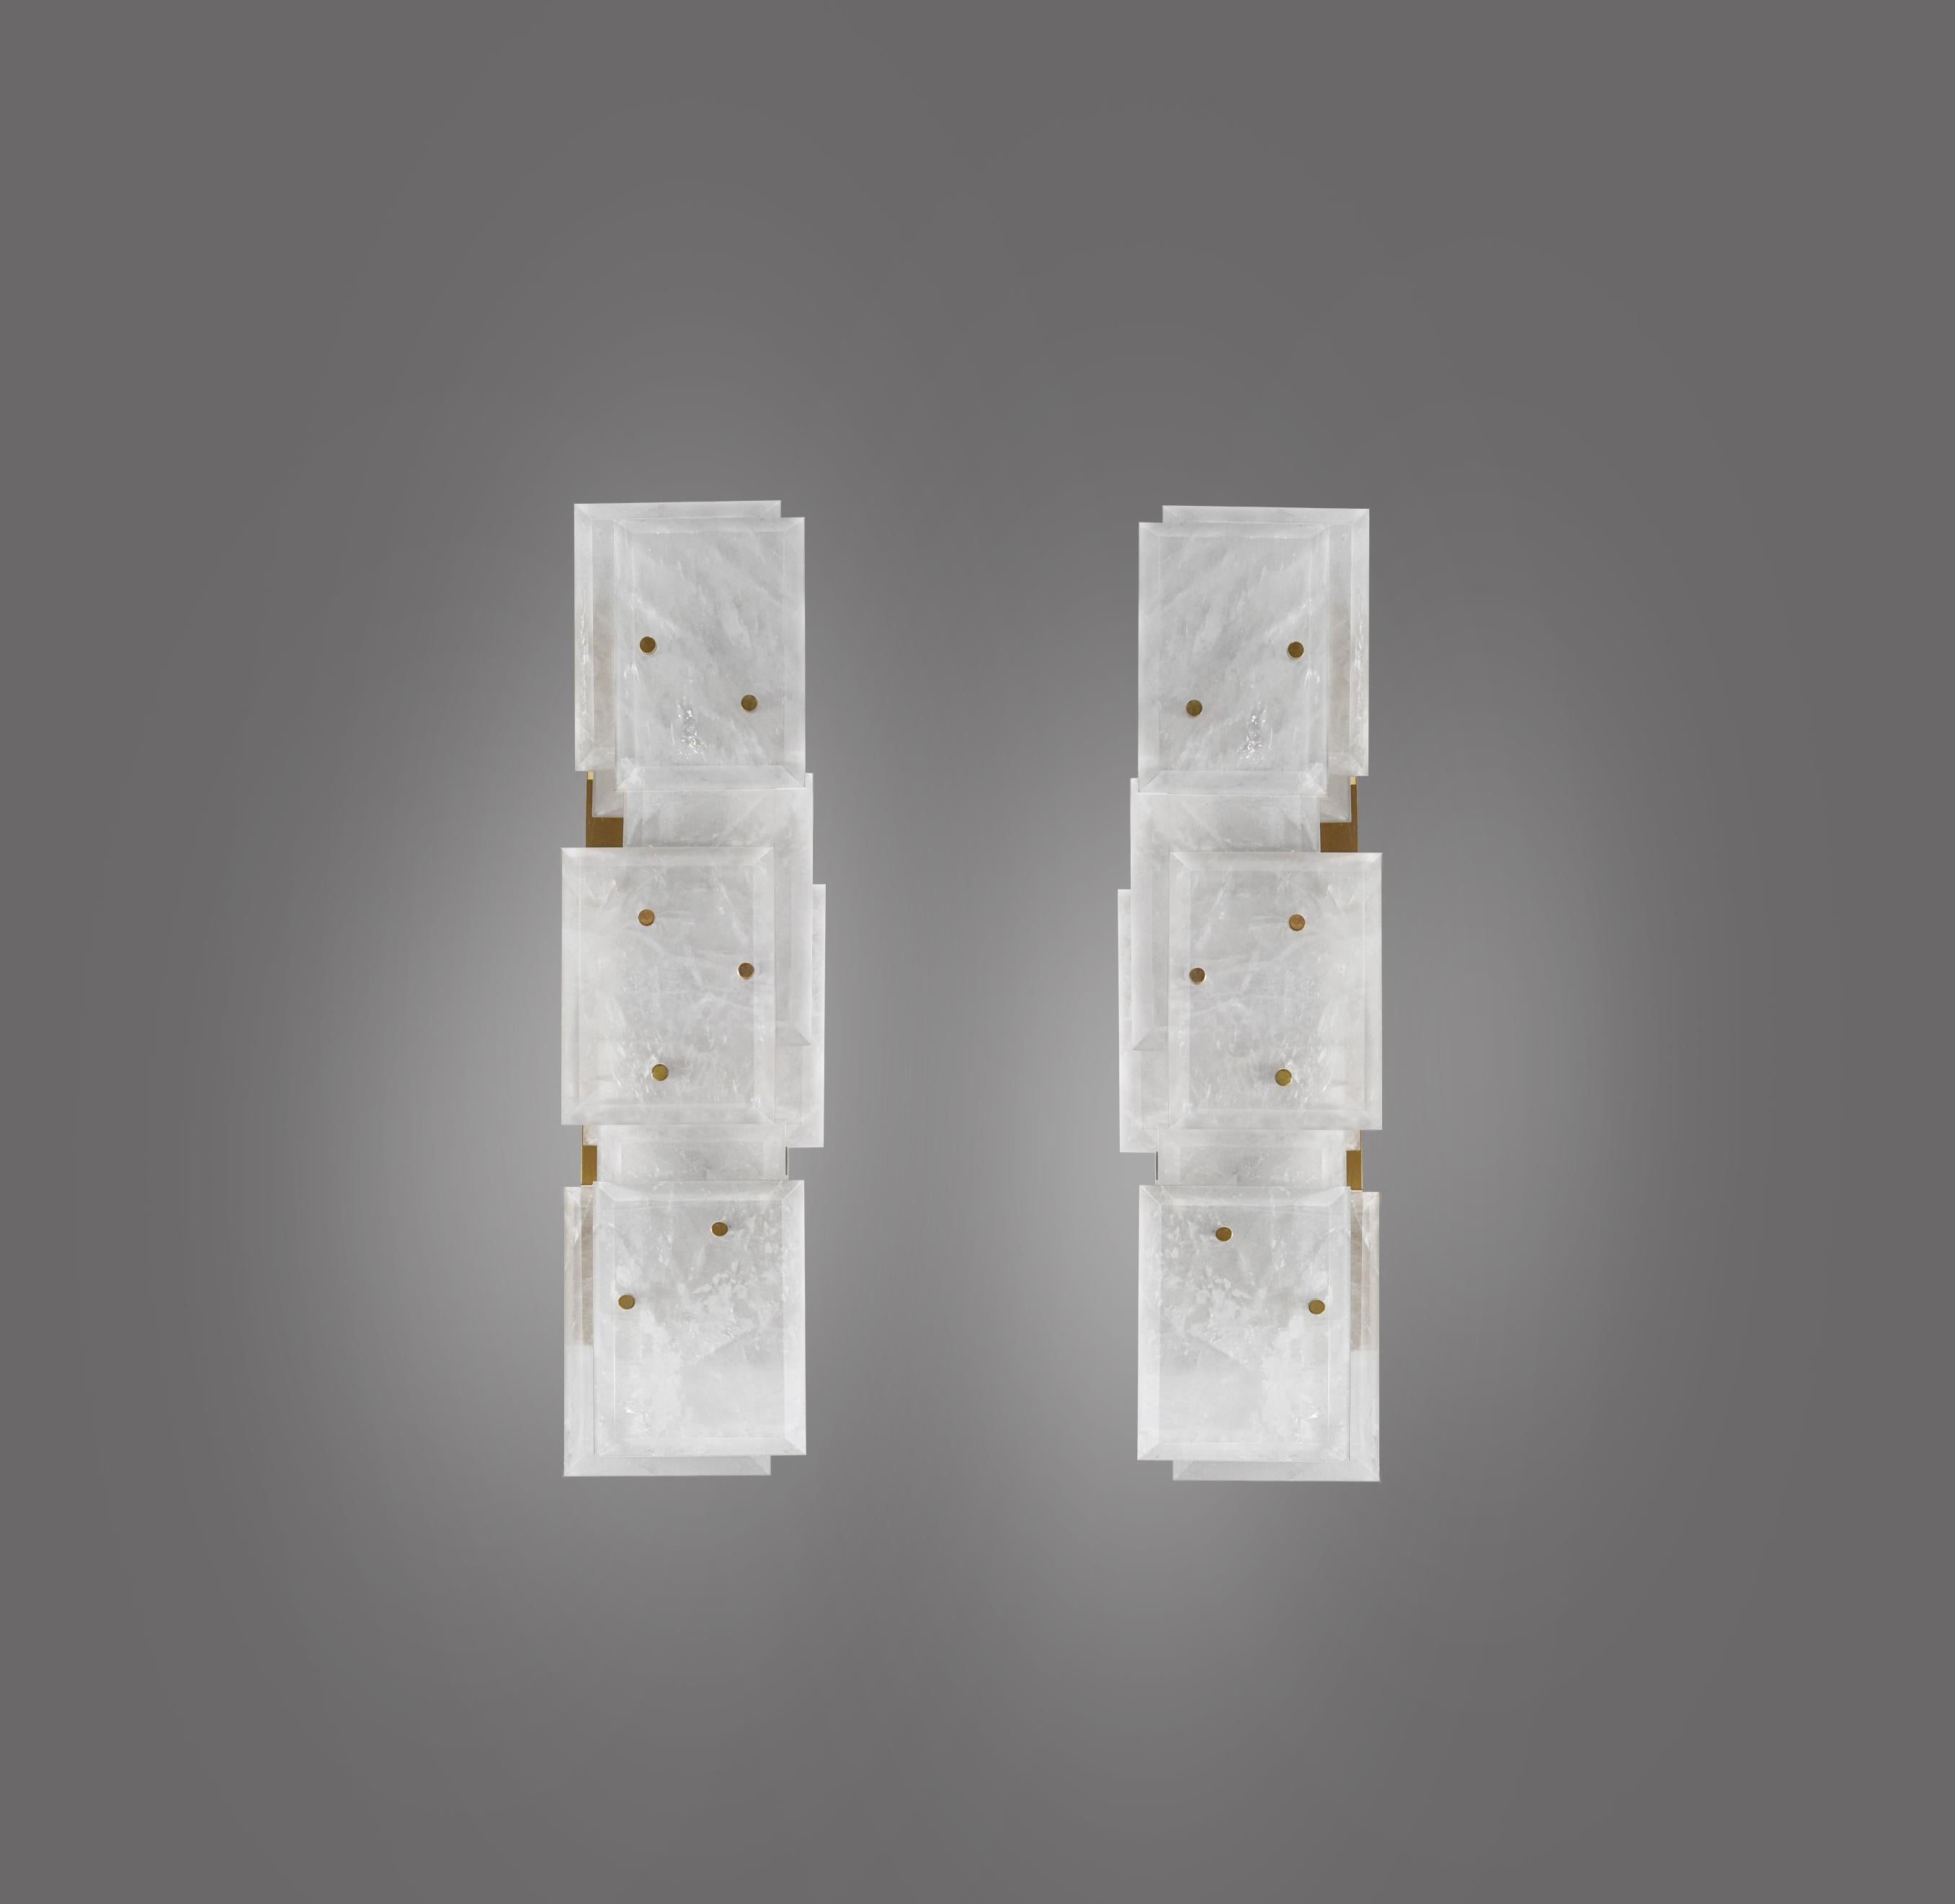 Pair of modern rock crystal quartz sconces with multiple panels decorations in polished brass finish. Created by Phoenix Gallery.
Each sconce has two sockets, use LED, long tube, warm lights.
80 watts LED, 160watts total. Warm lights are